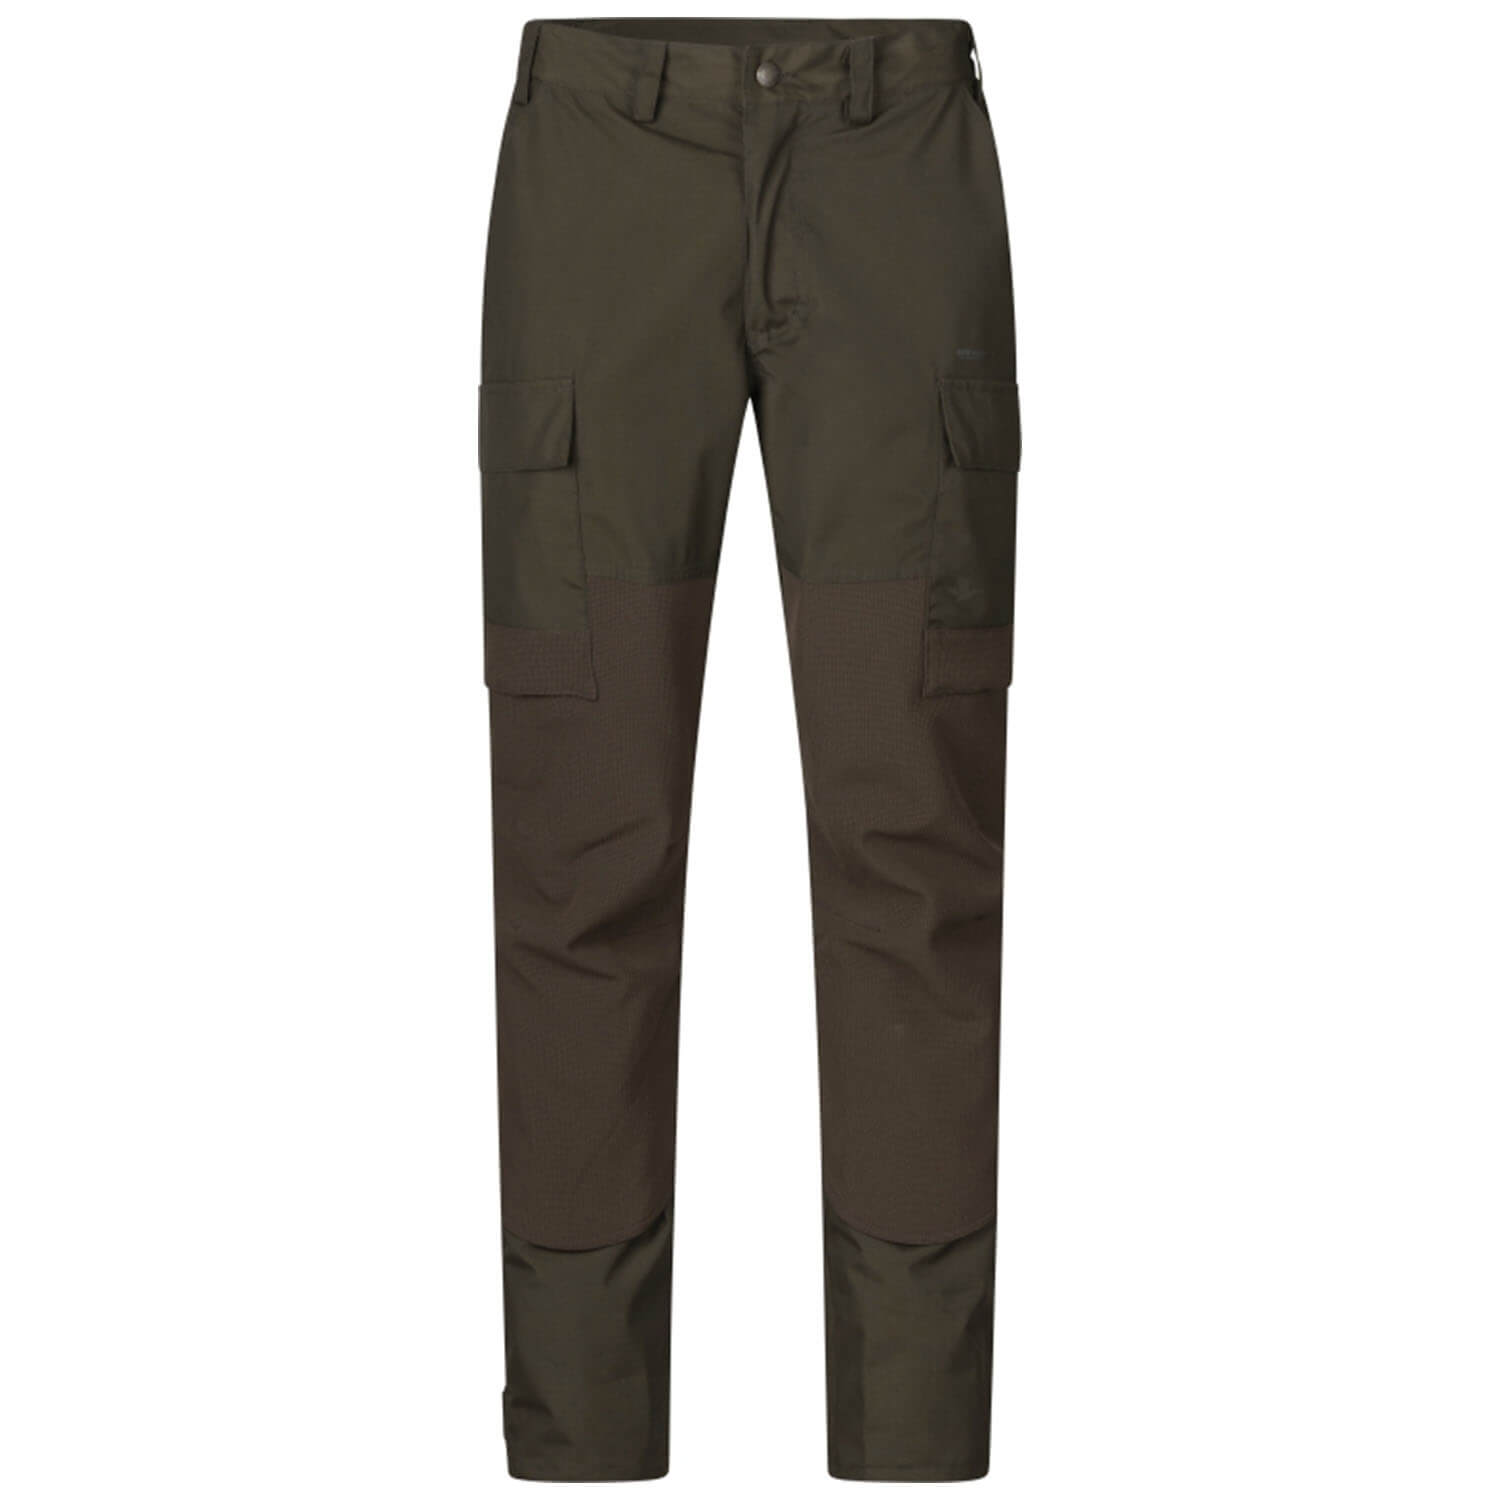 Seeland hunting pants Arden (pine green)